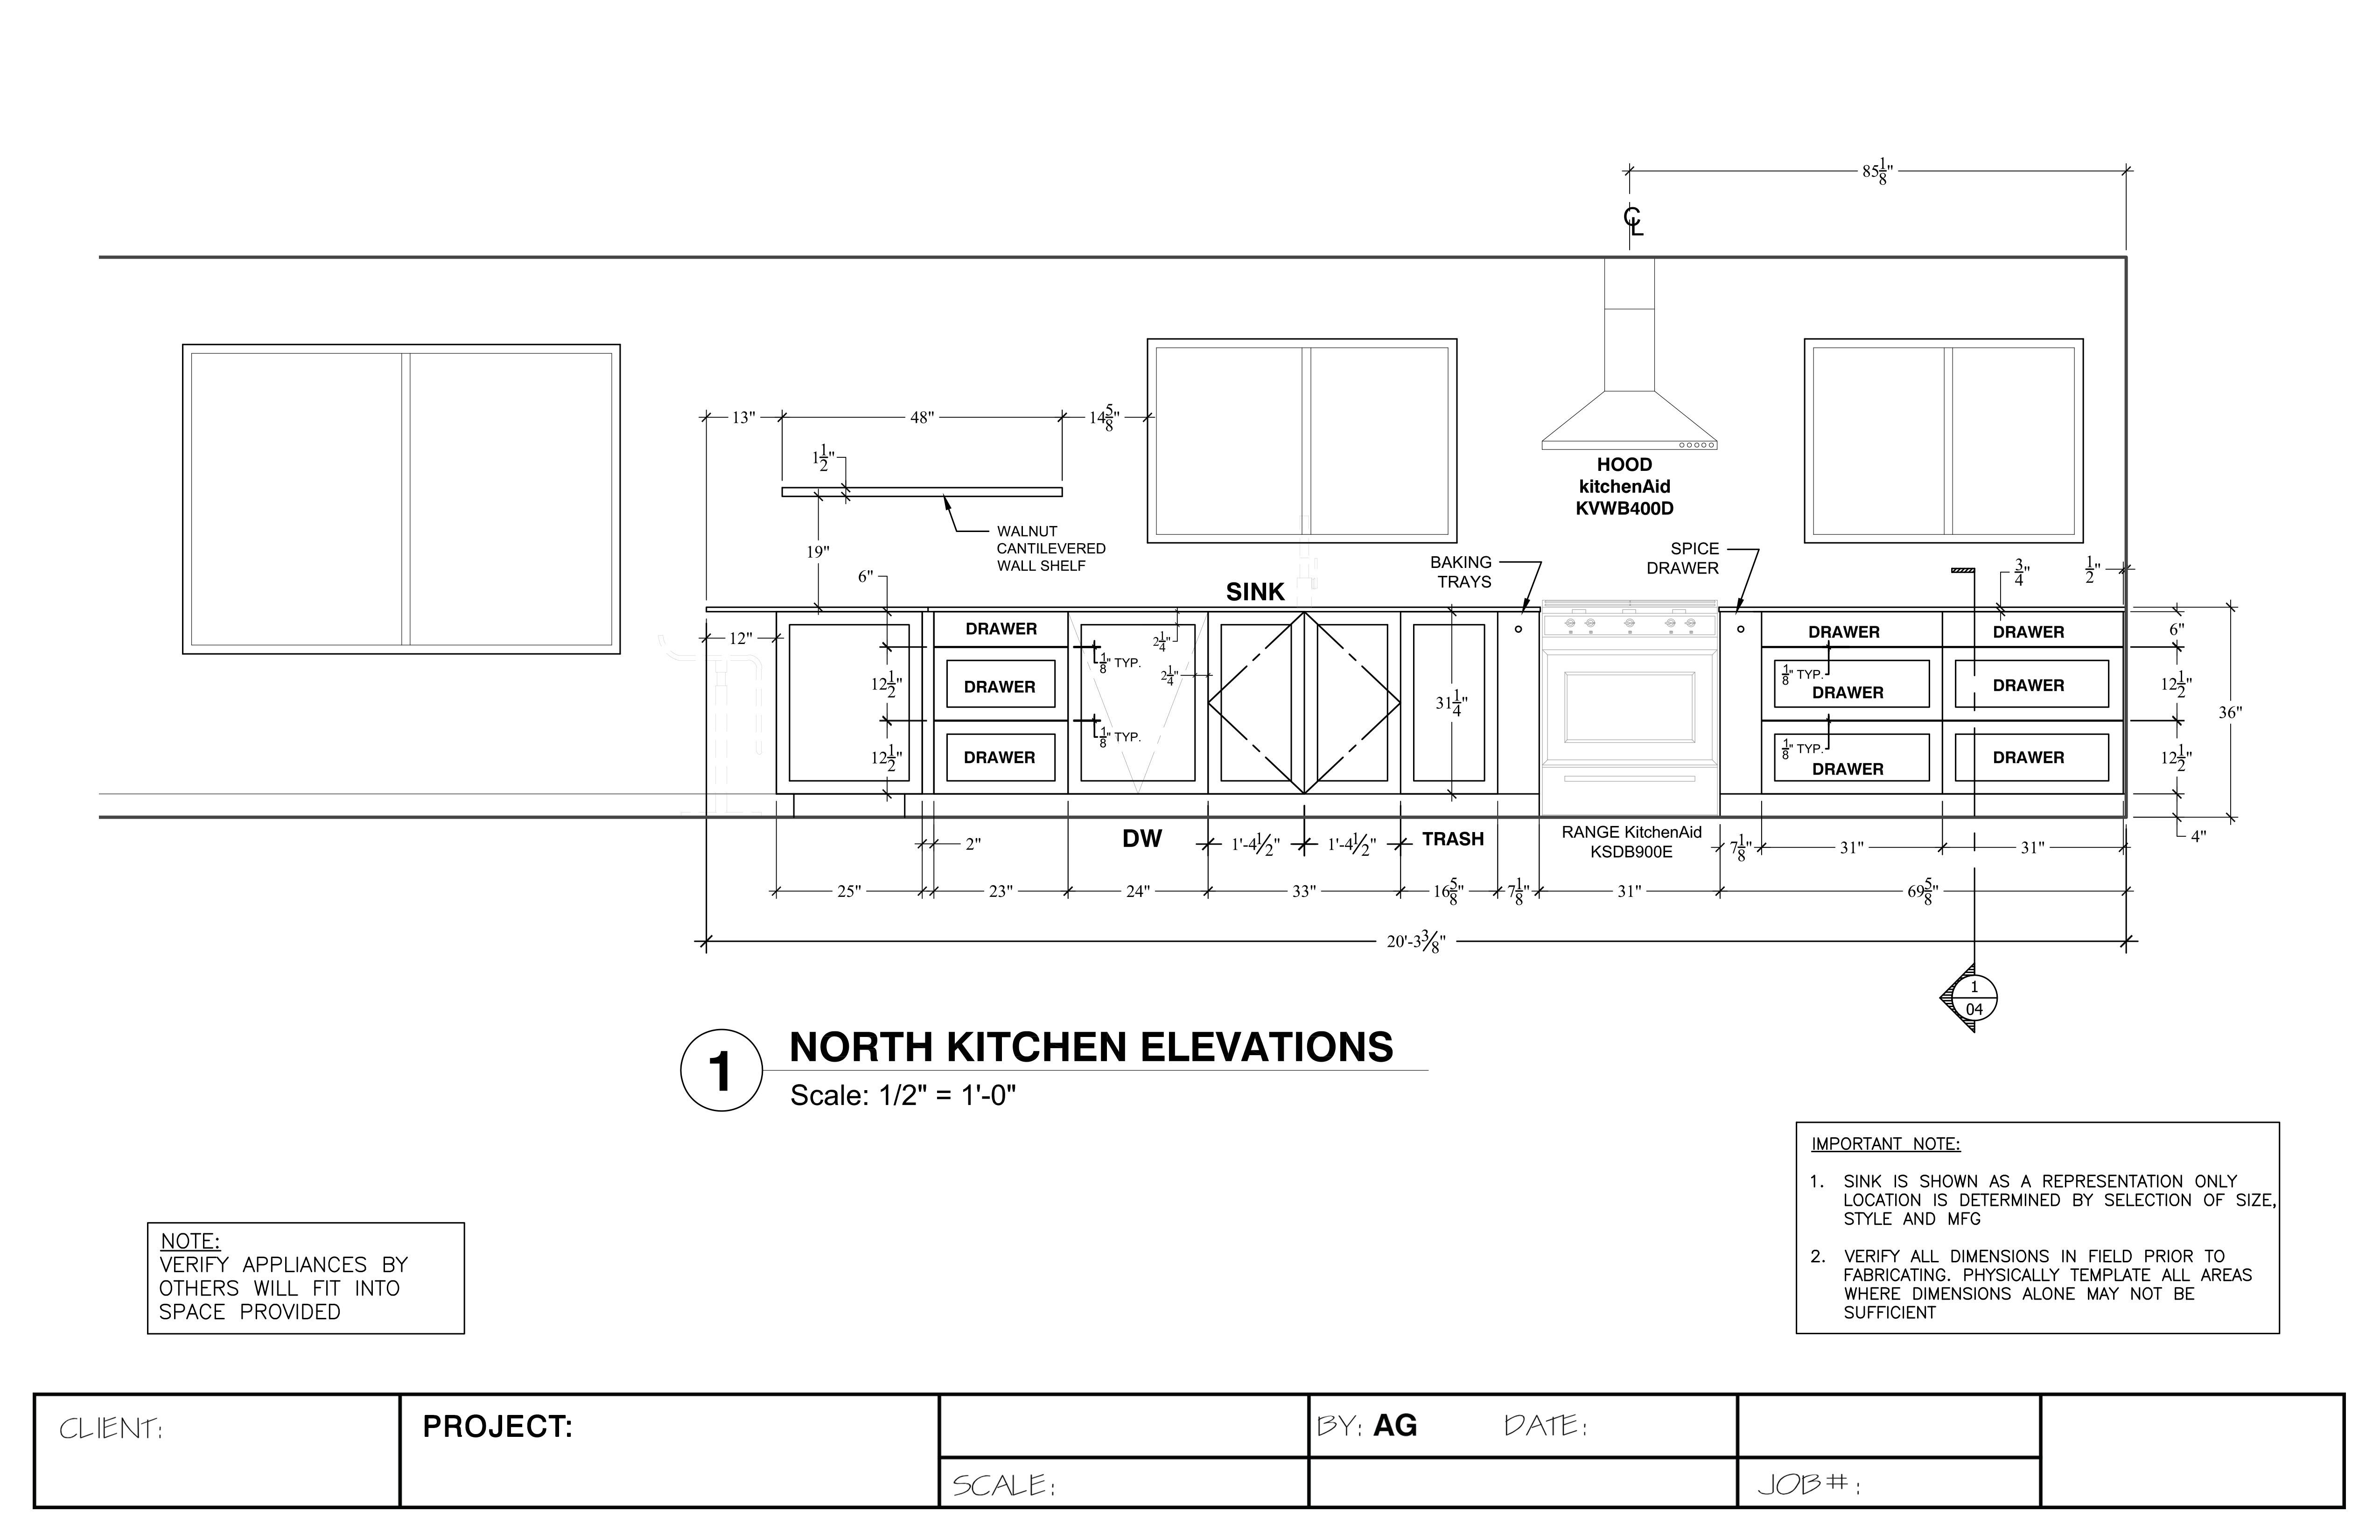 Millwork, casework cabinet and interior design shop drawings | Andrew